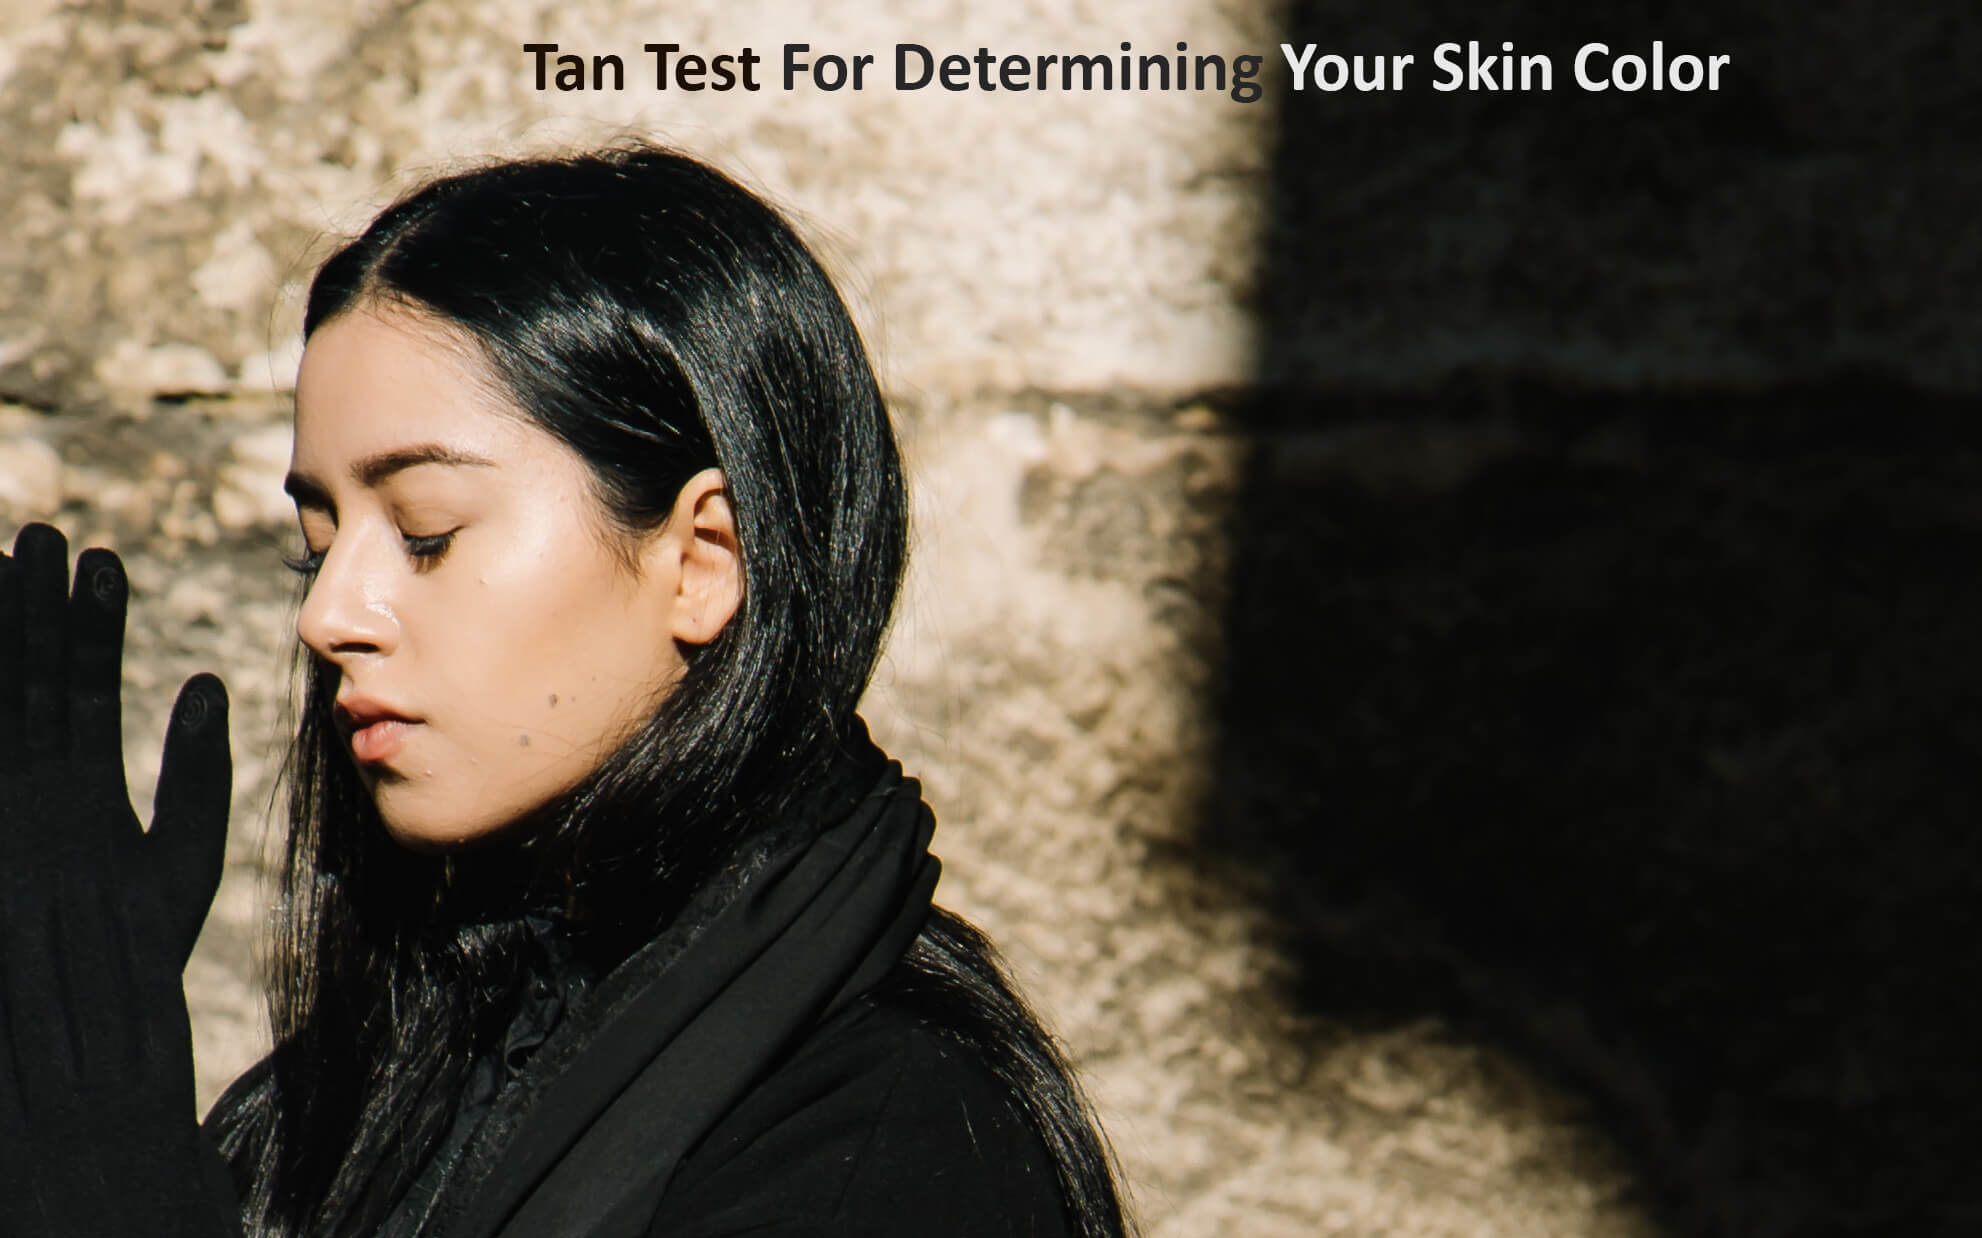 Tan test to determine your skin color lifestylemajor edited